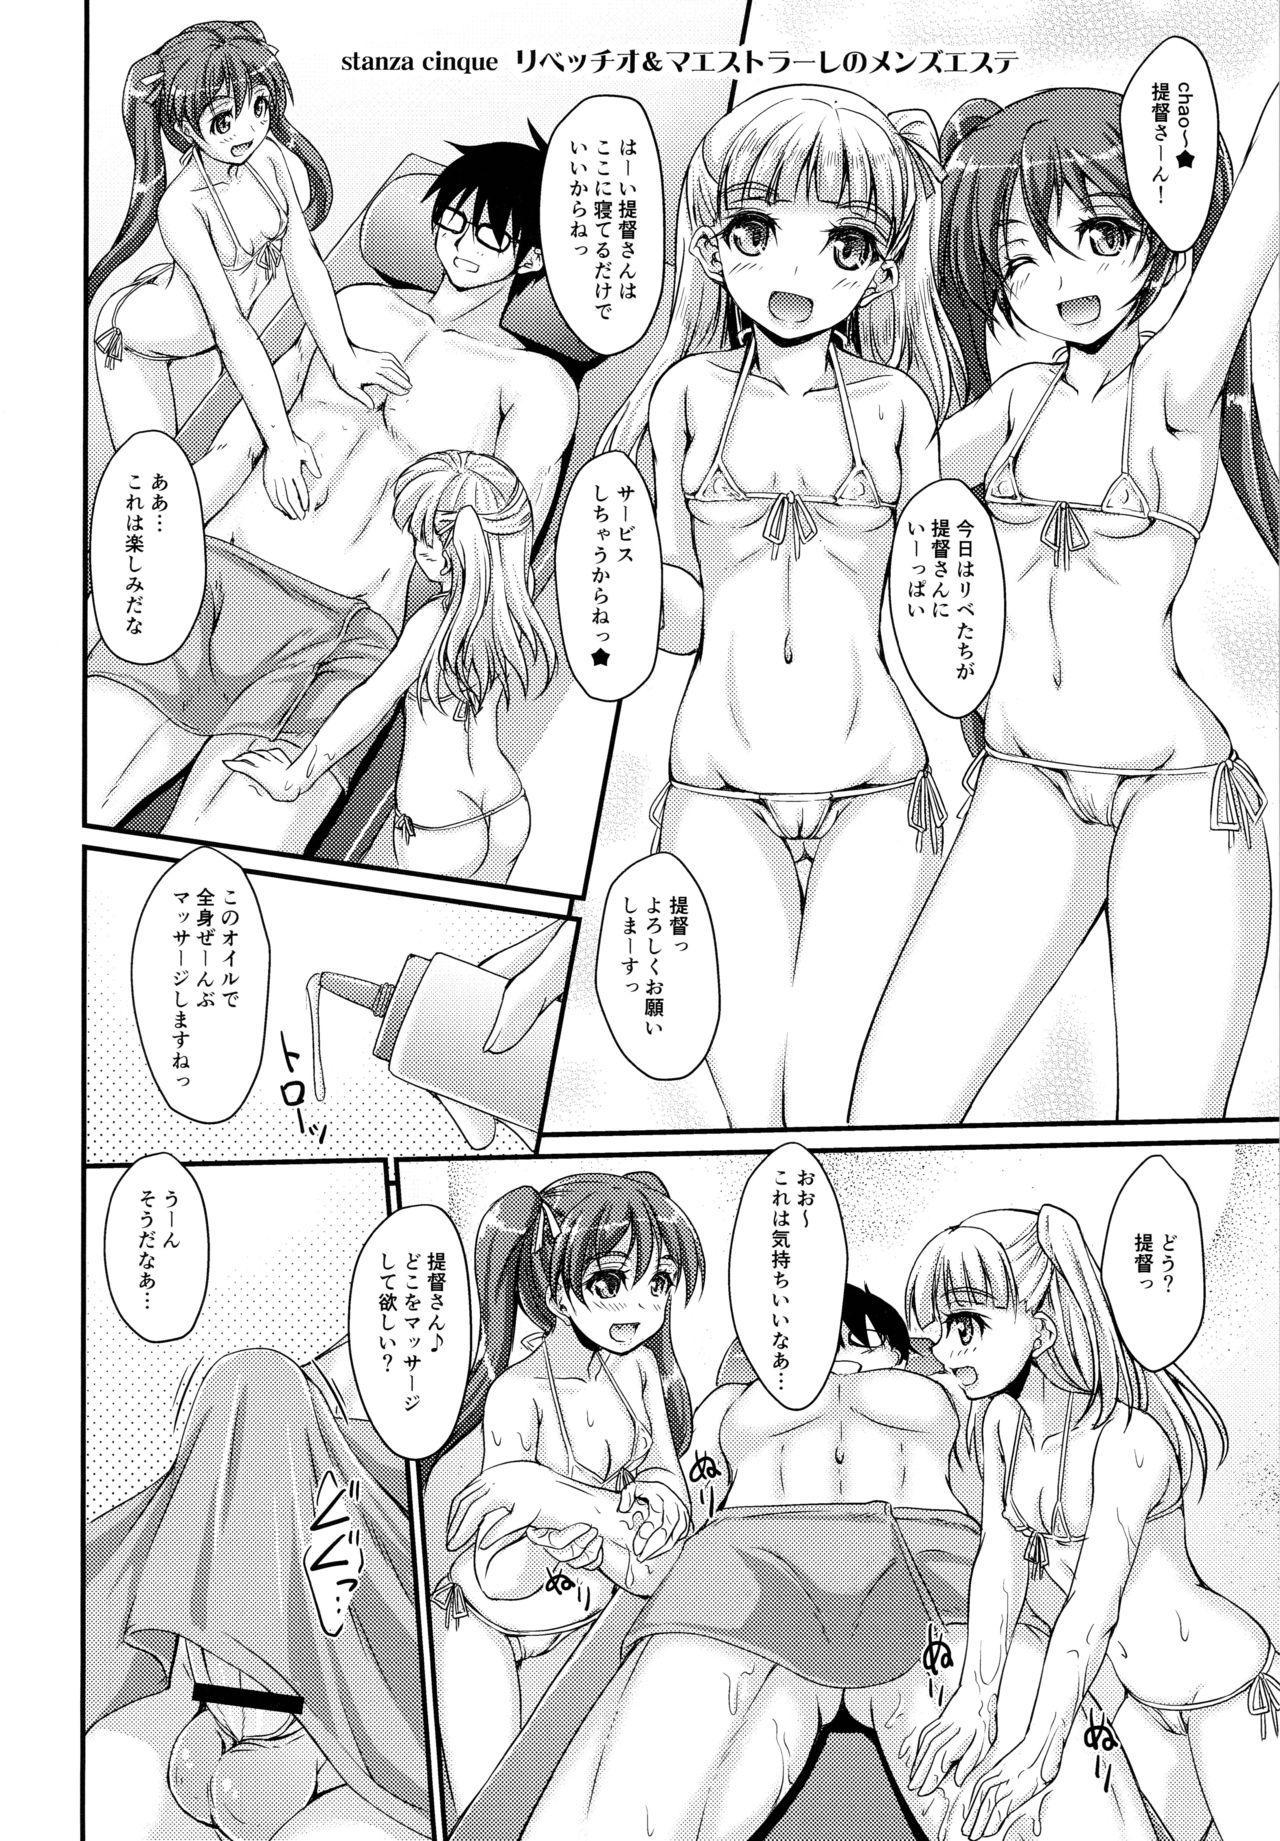 Stretching Palazzo Tricolore - Kantai collection Nudity - Page 13